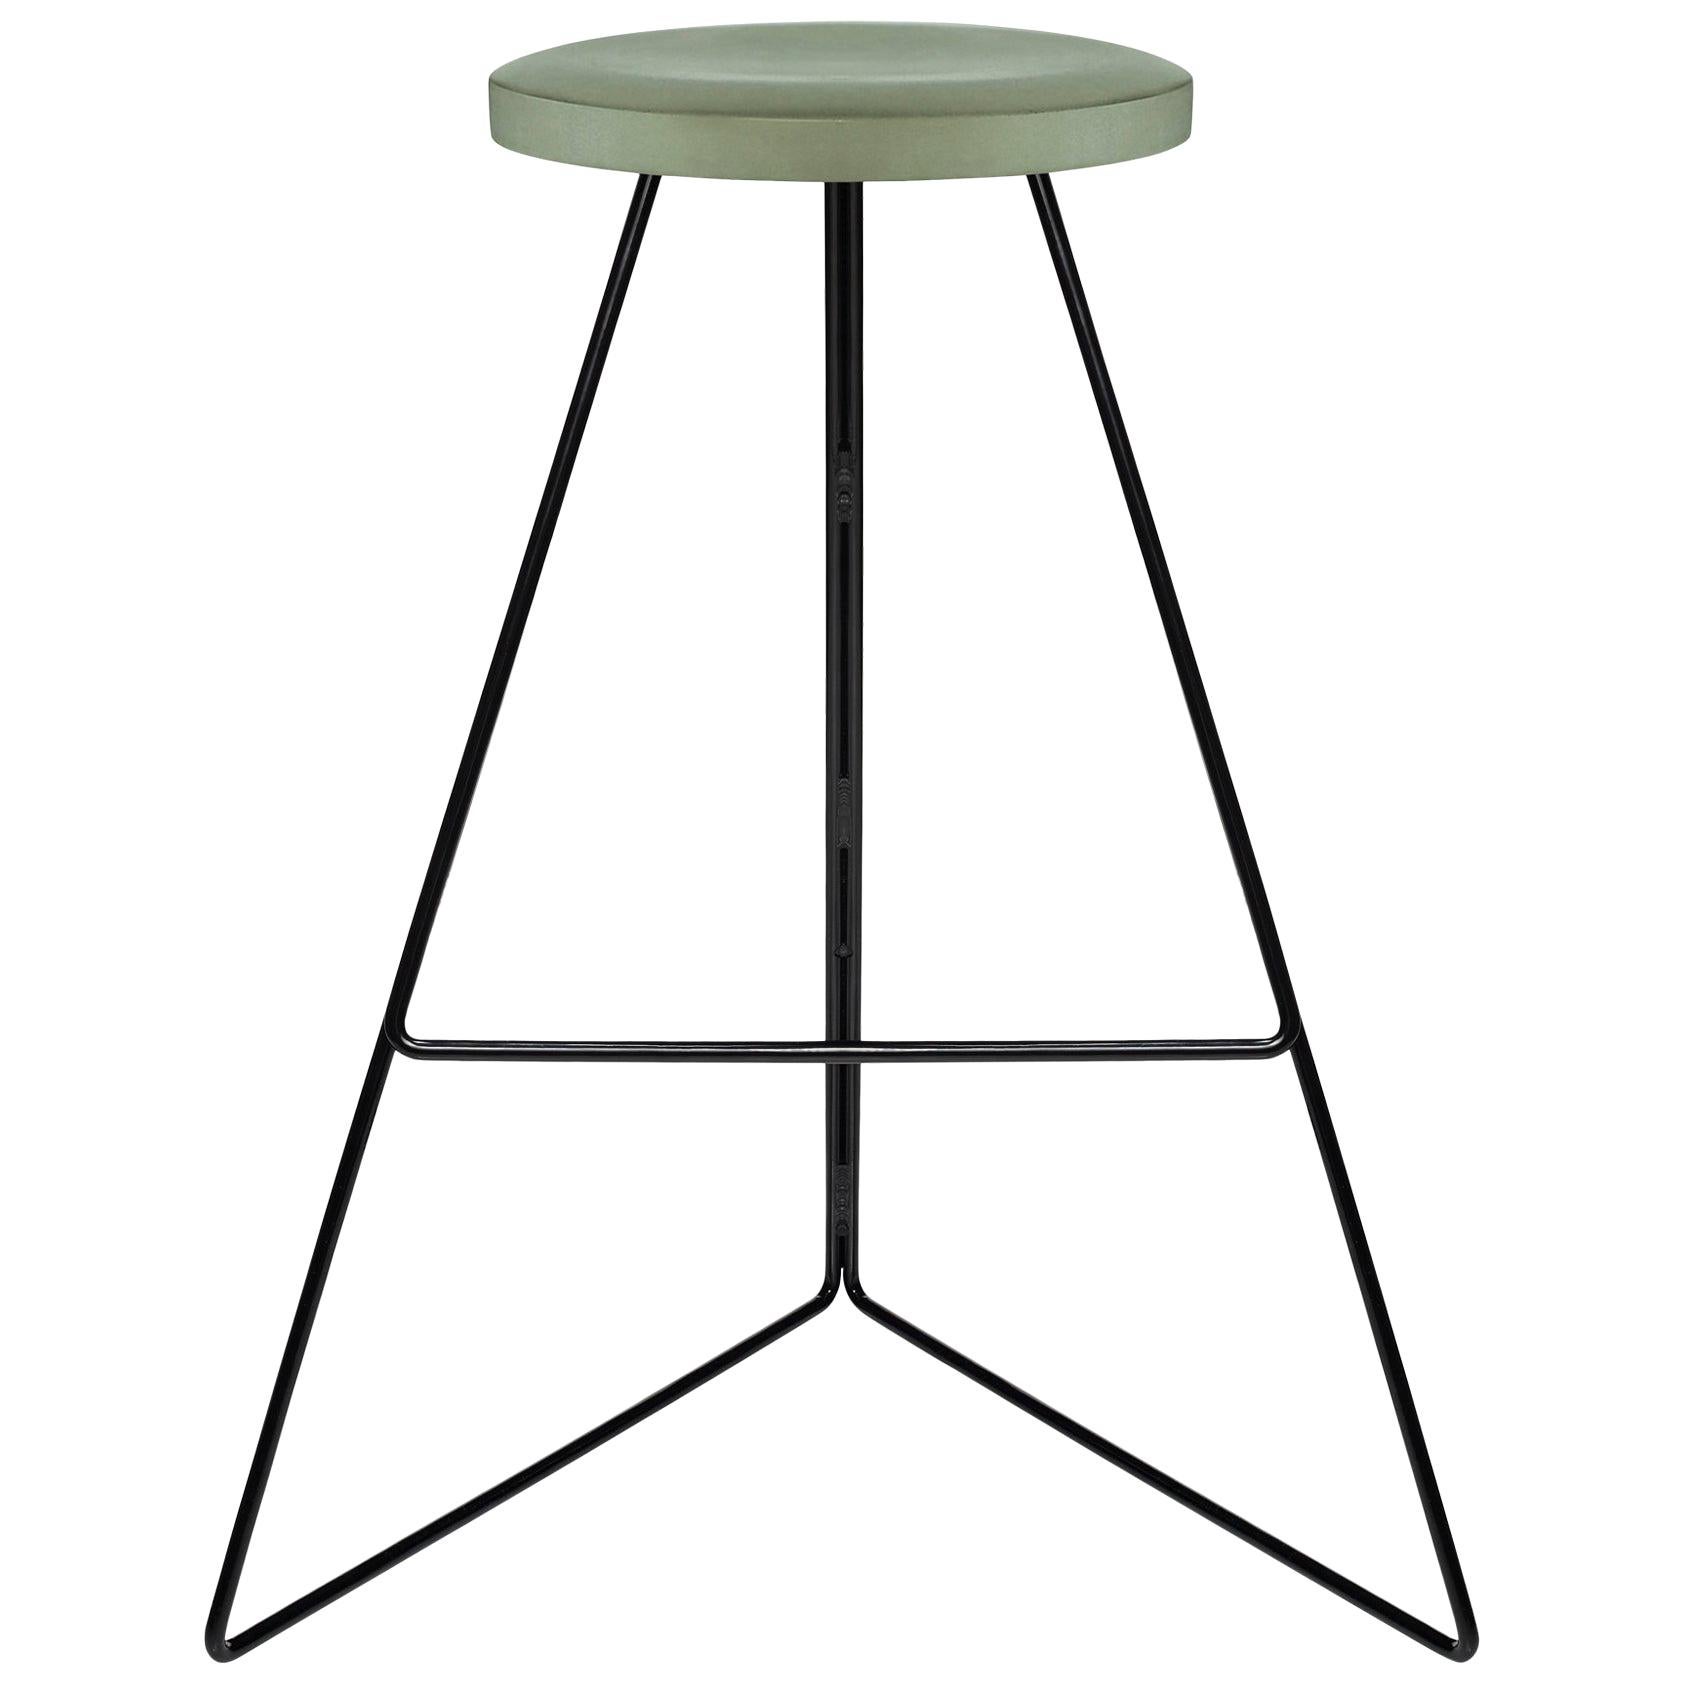 Coleman Stool, Black and Aspen, Counter Stool For Sale